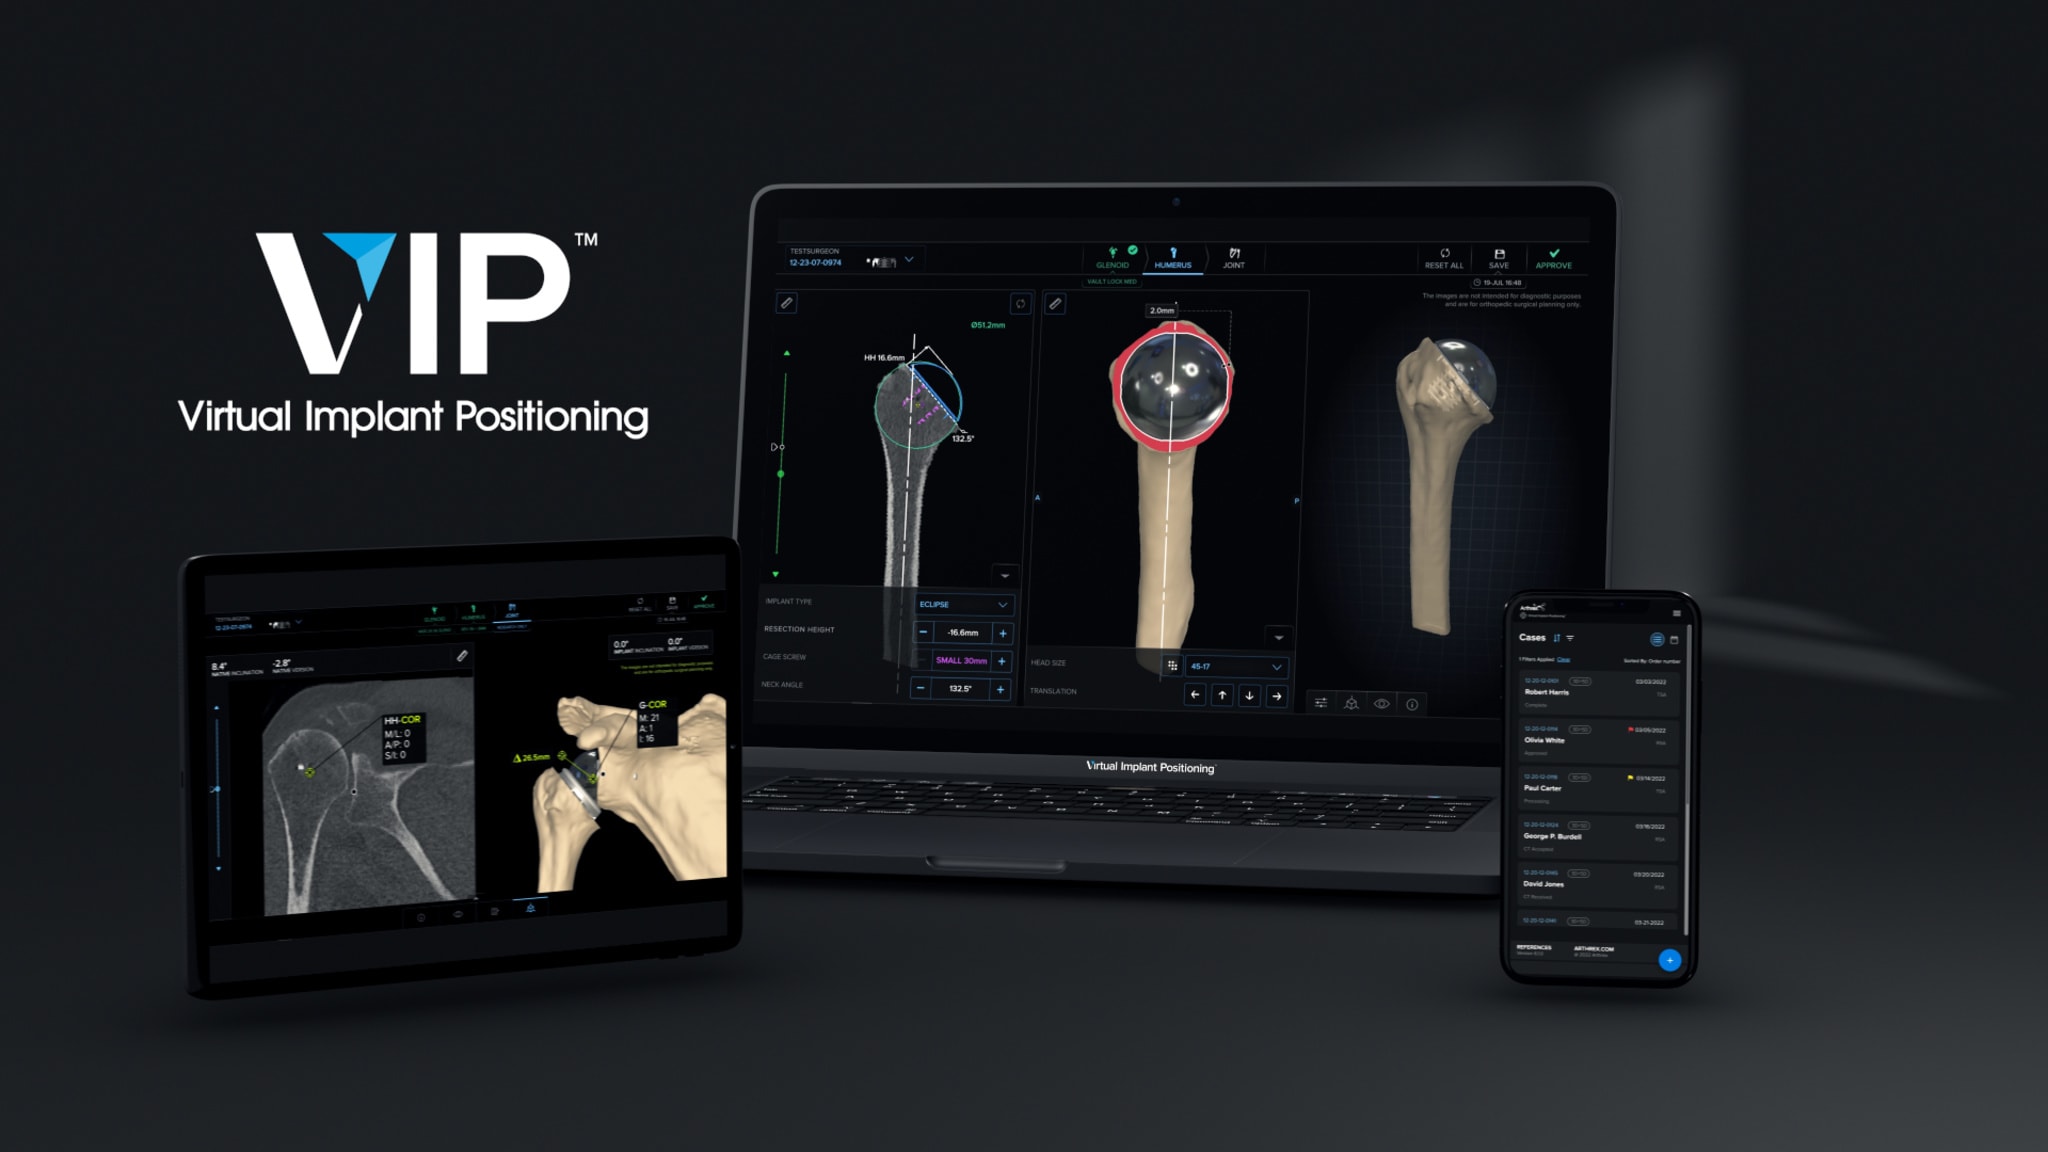 Coming Soon to the VIP™ Experience: Humeral Planning